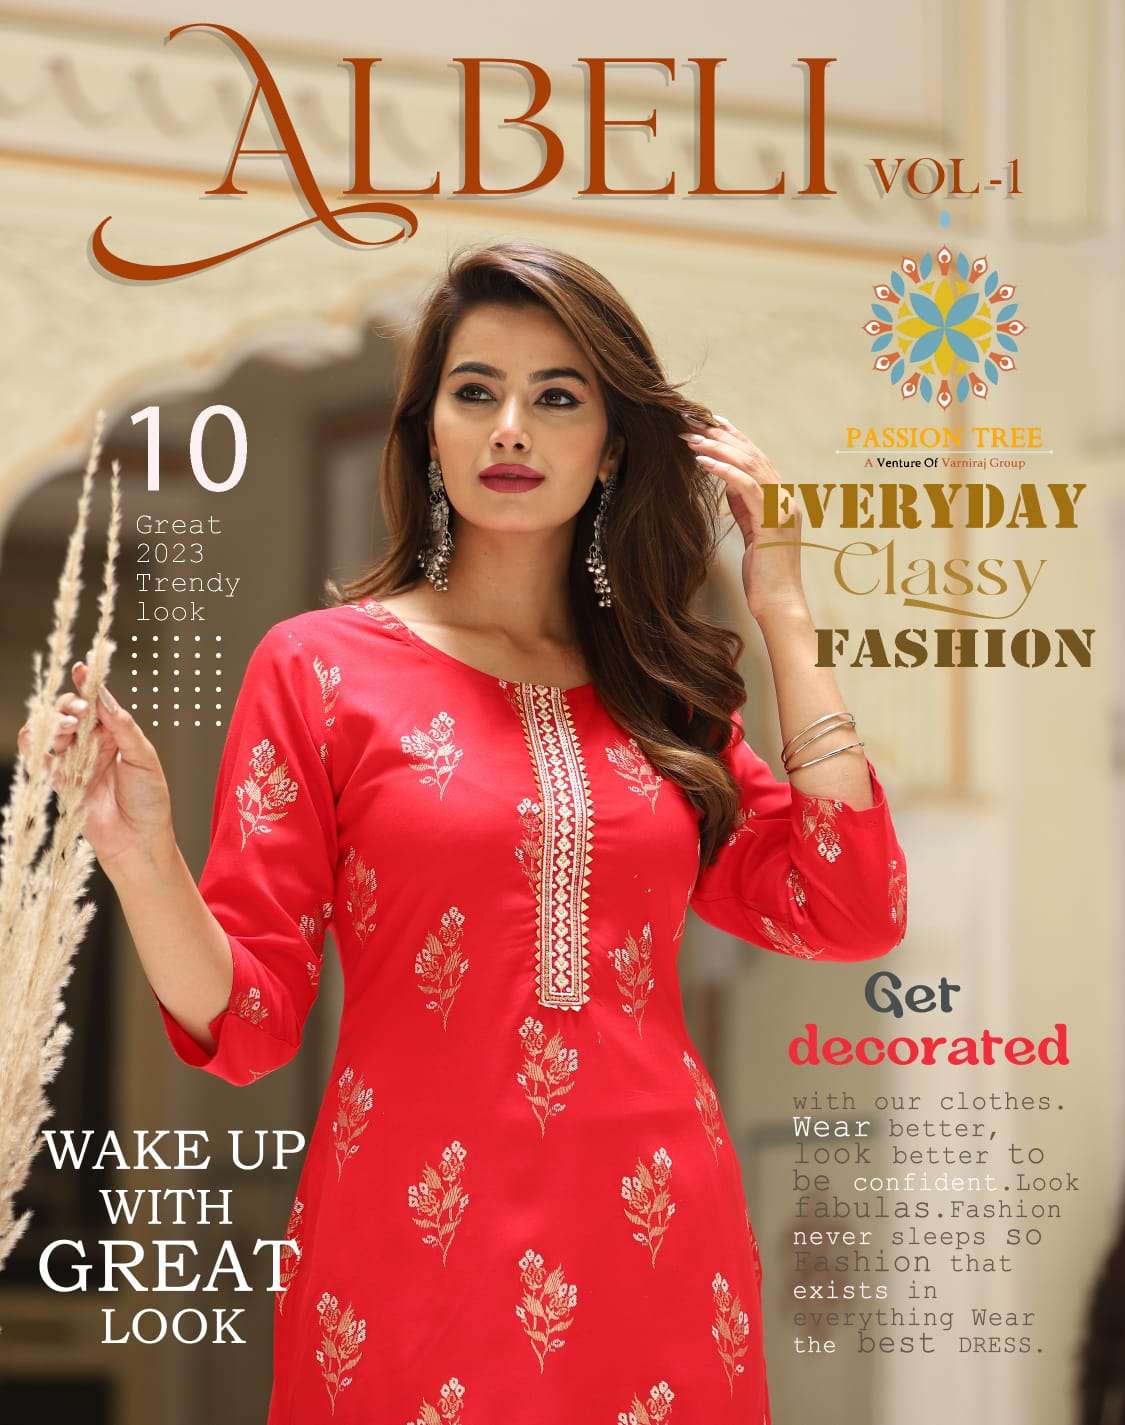 ALBELI RAYON GOLD PRINT FANCY EMBROIDERY WORK KURTI BY PASSION TREE BRAND WHOLESALER AND DEALER